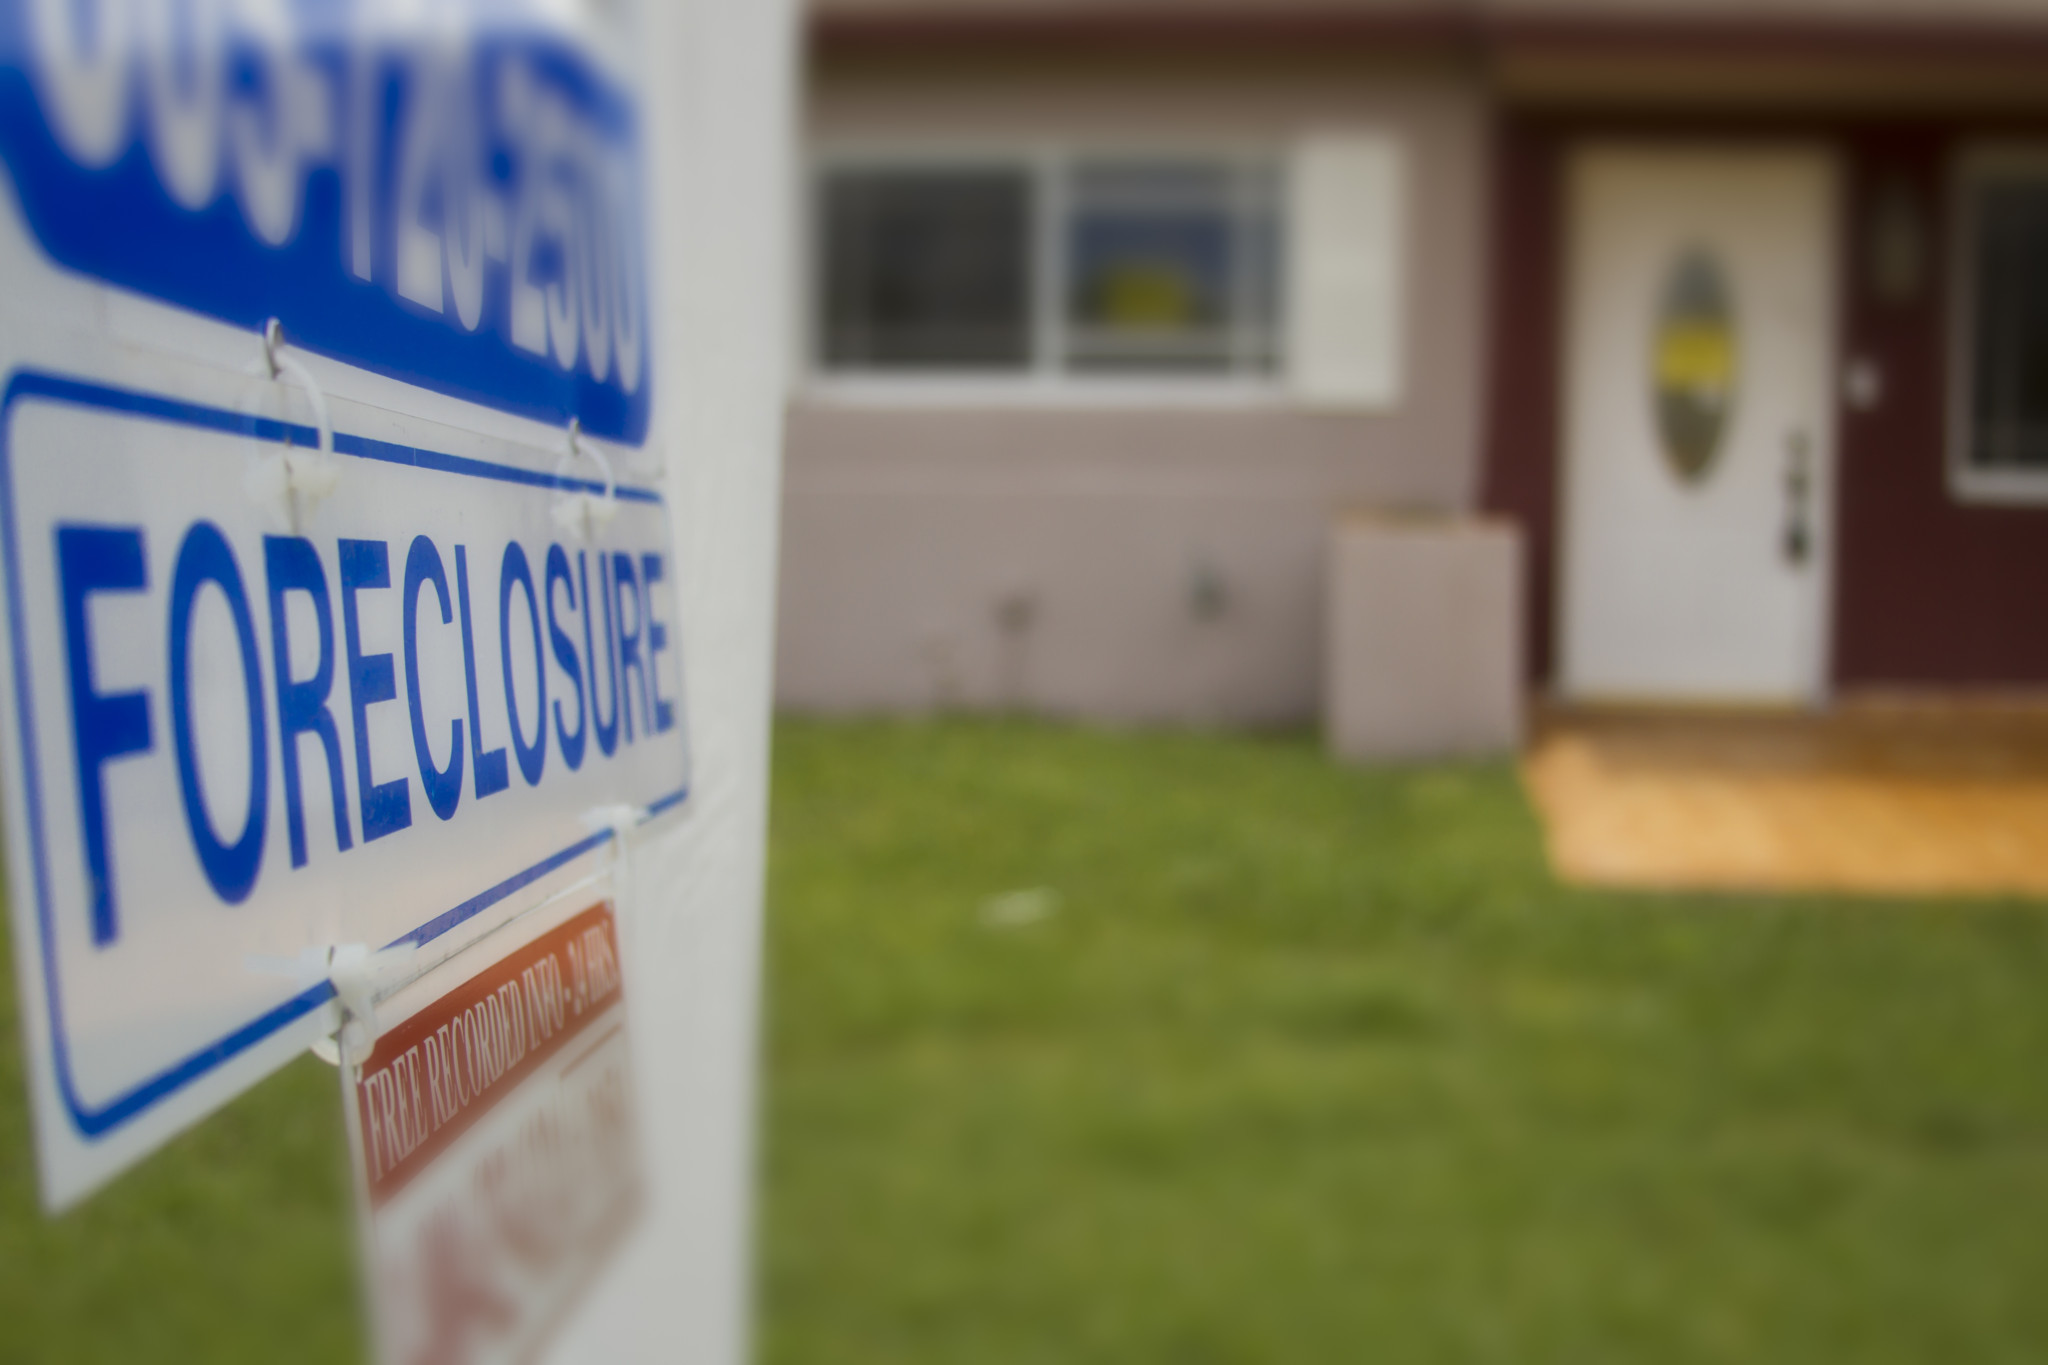 what do i need to know about buying a foreclosed home